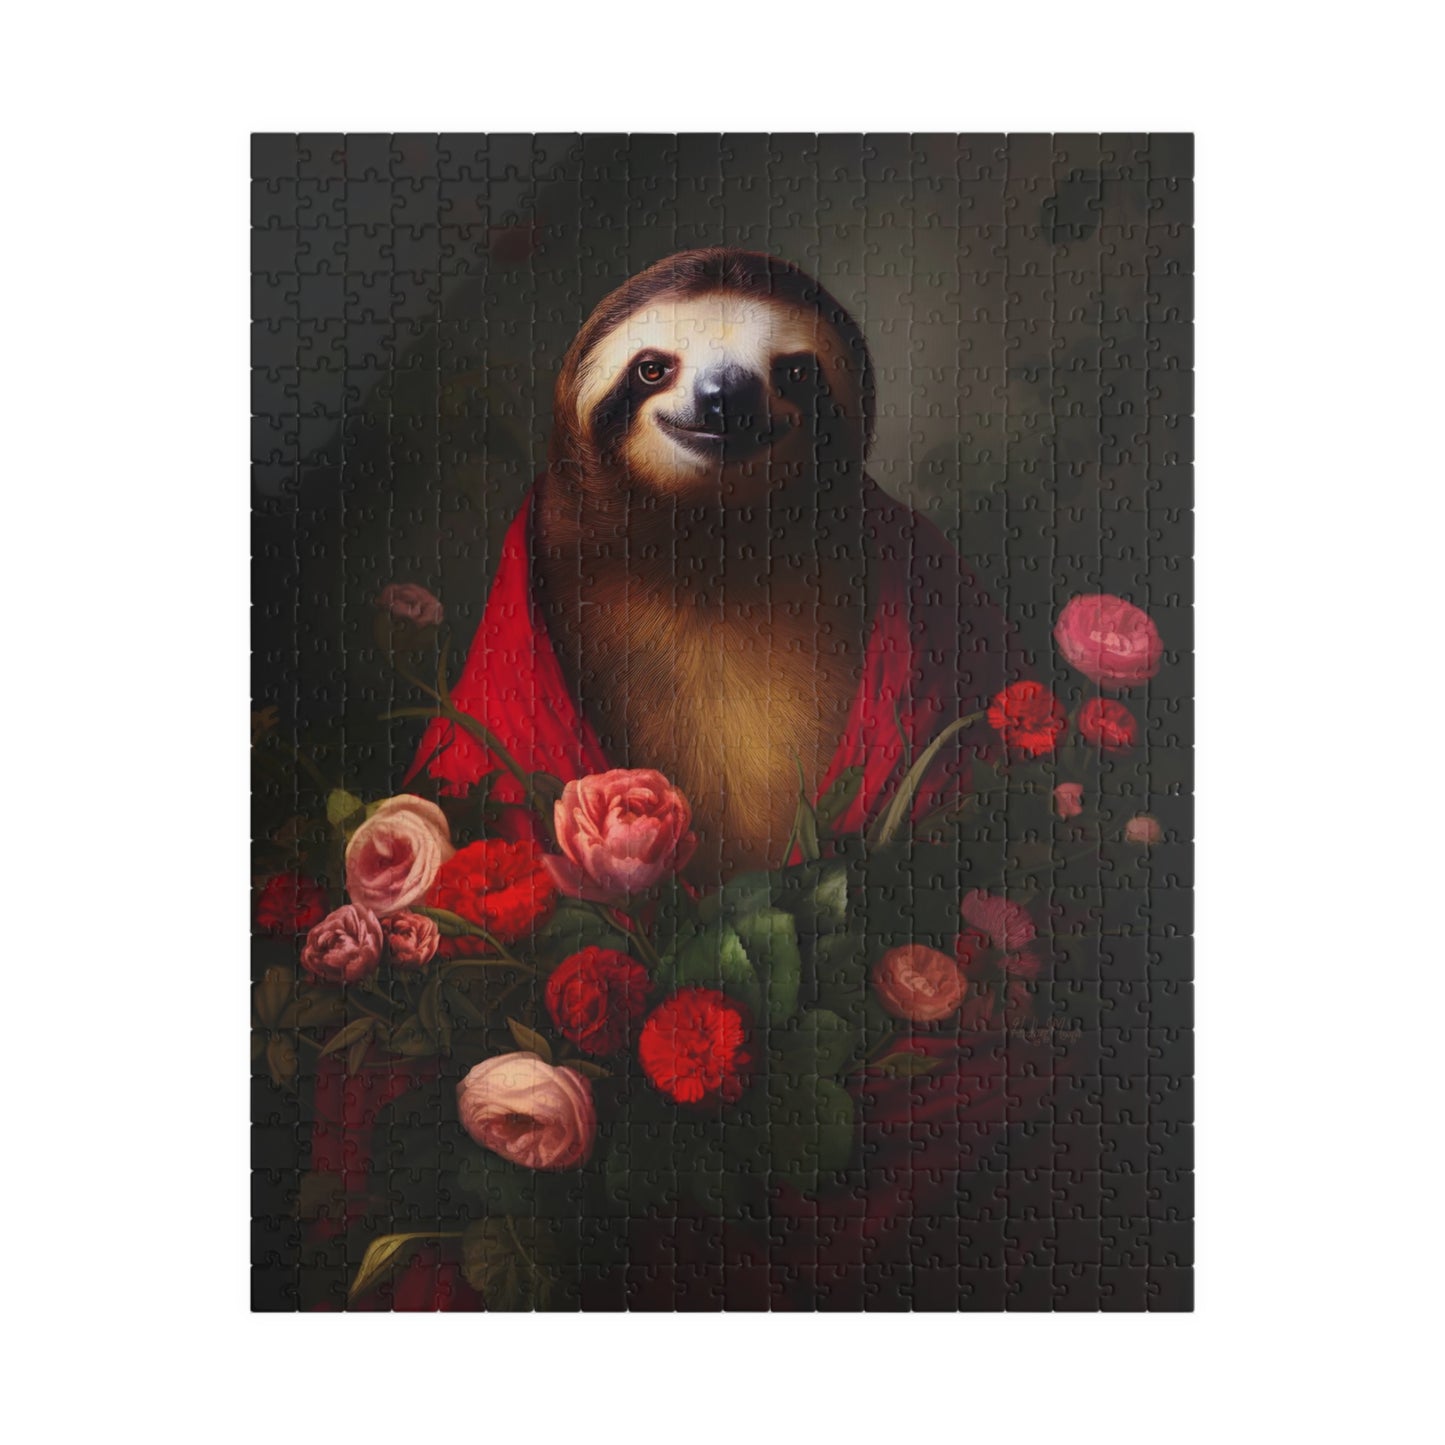 Majestic Sloth with Lush Flowers | Jigsaw Puzzle